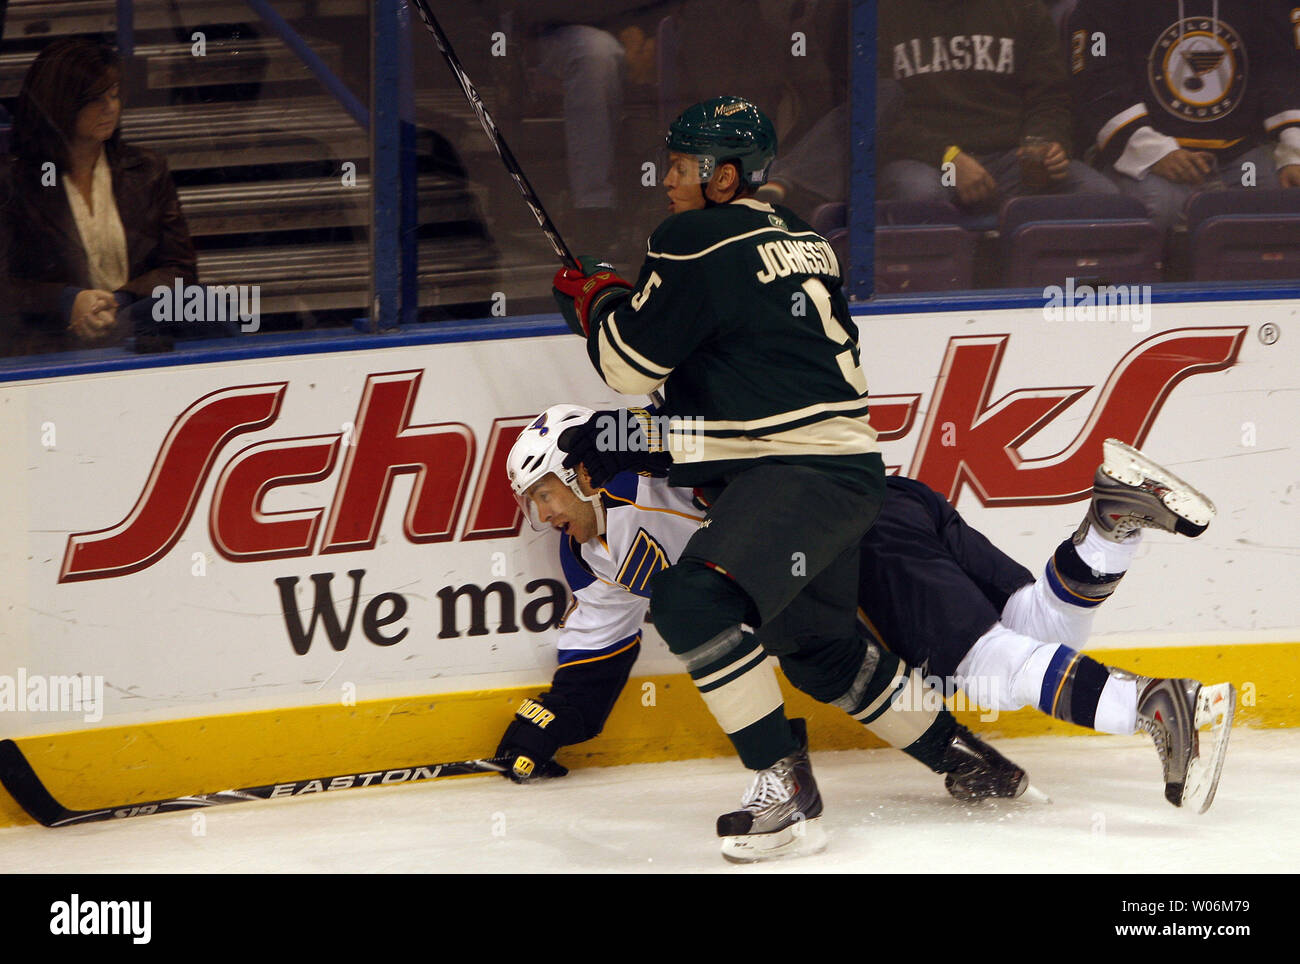 Minnesota Wild Kim Johnsson (5) takes down St. Louis Blues Andy McDonald during the first period at the Scottrade Center in St. Louis on October 23, 2009. UPI/Bill Greenblatt Stock Photo